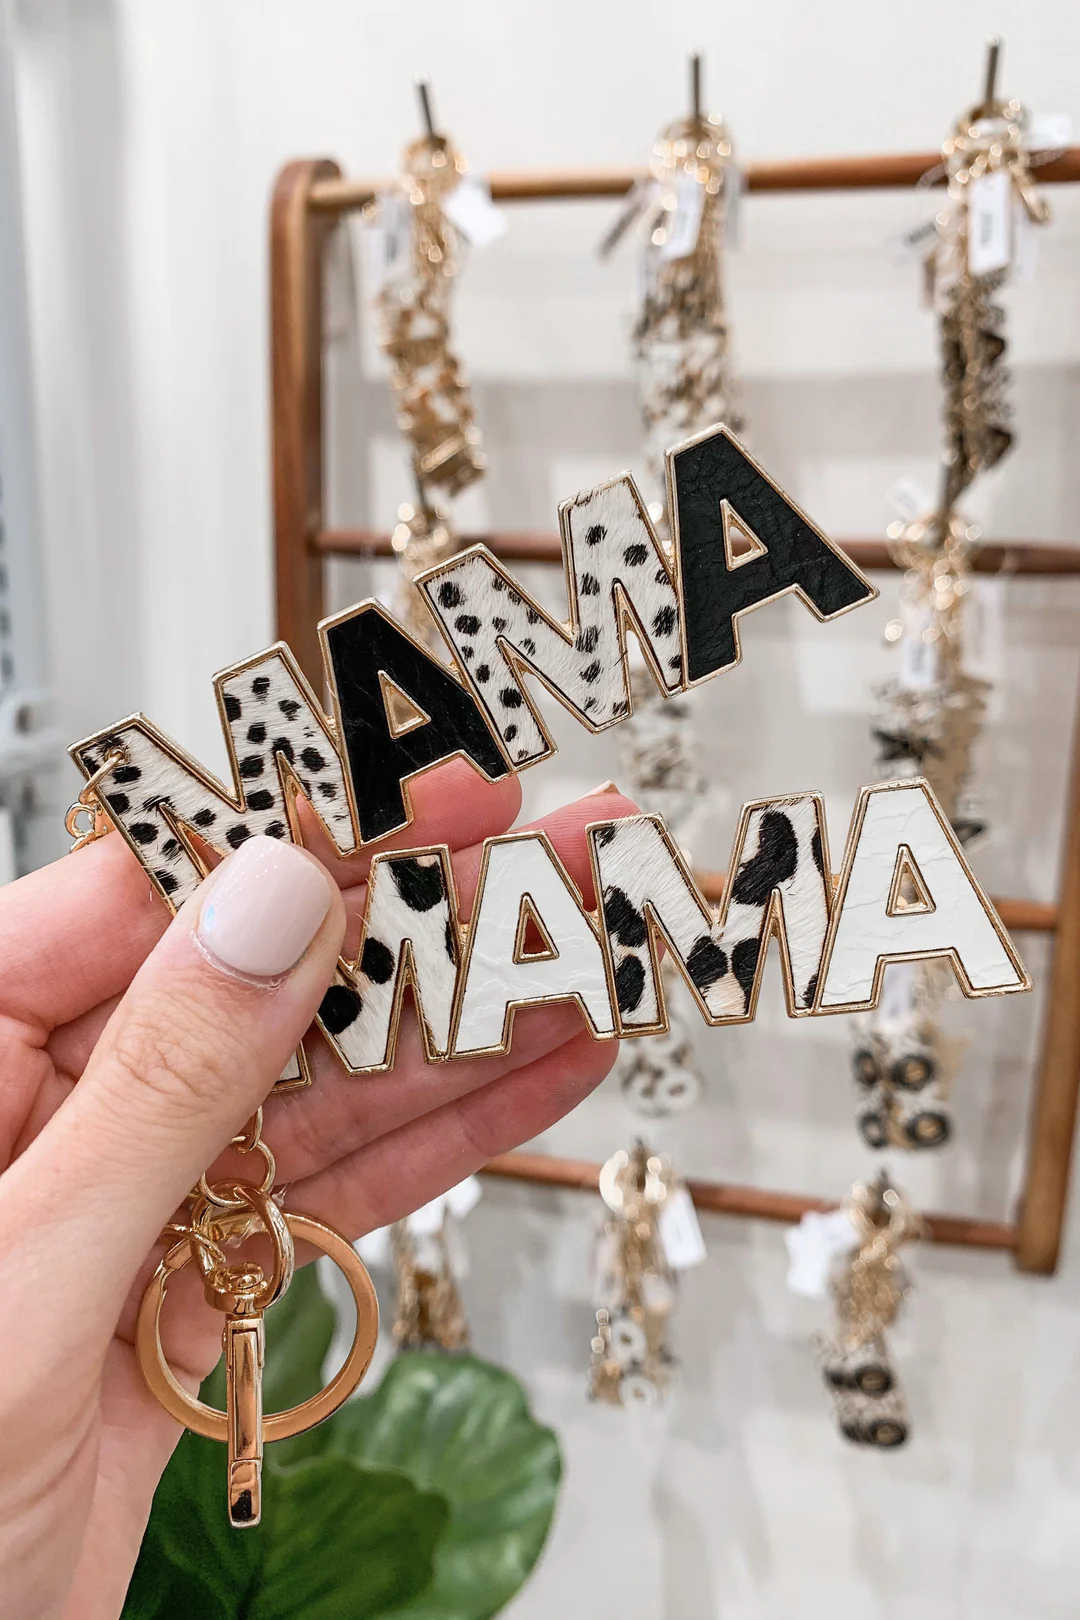 Hand holding an animal print keychain with the word "Mama" on it.